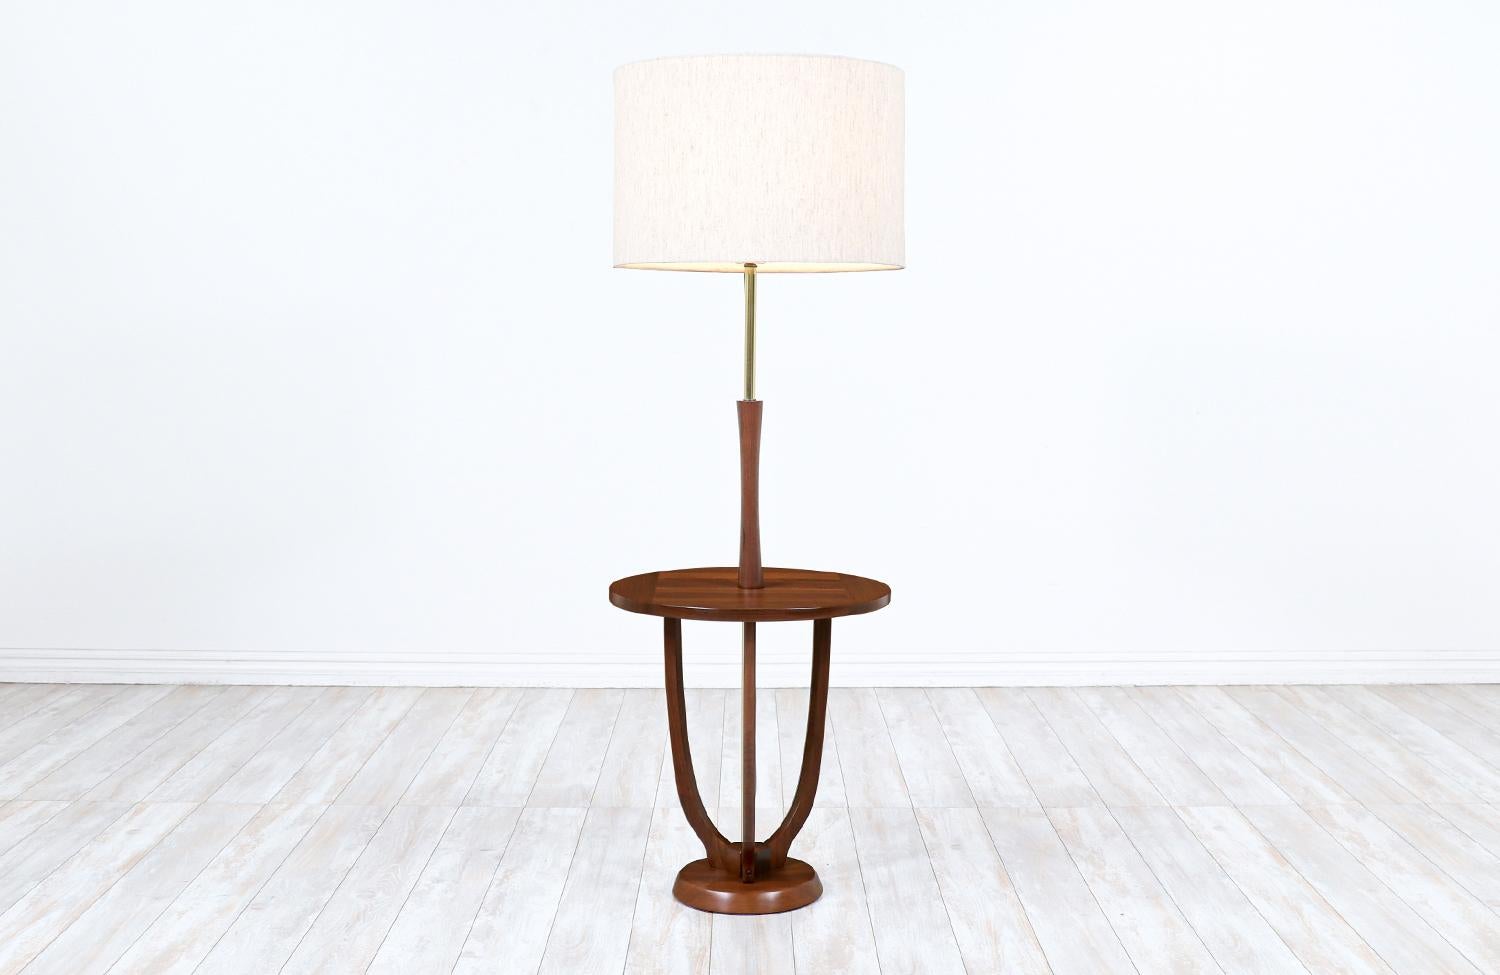 Dimensions
53 in H x 18 in W x 18 in D
Lamp shade: 12 in H x 18 in W
Table Height: 20.25 in.
 
________________________________________

Transforming a piece of Mid-Century Modern furniture is like bringing history back to life, and we take this